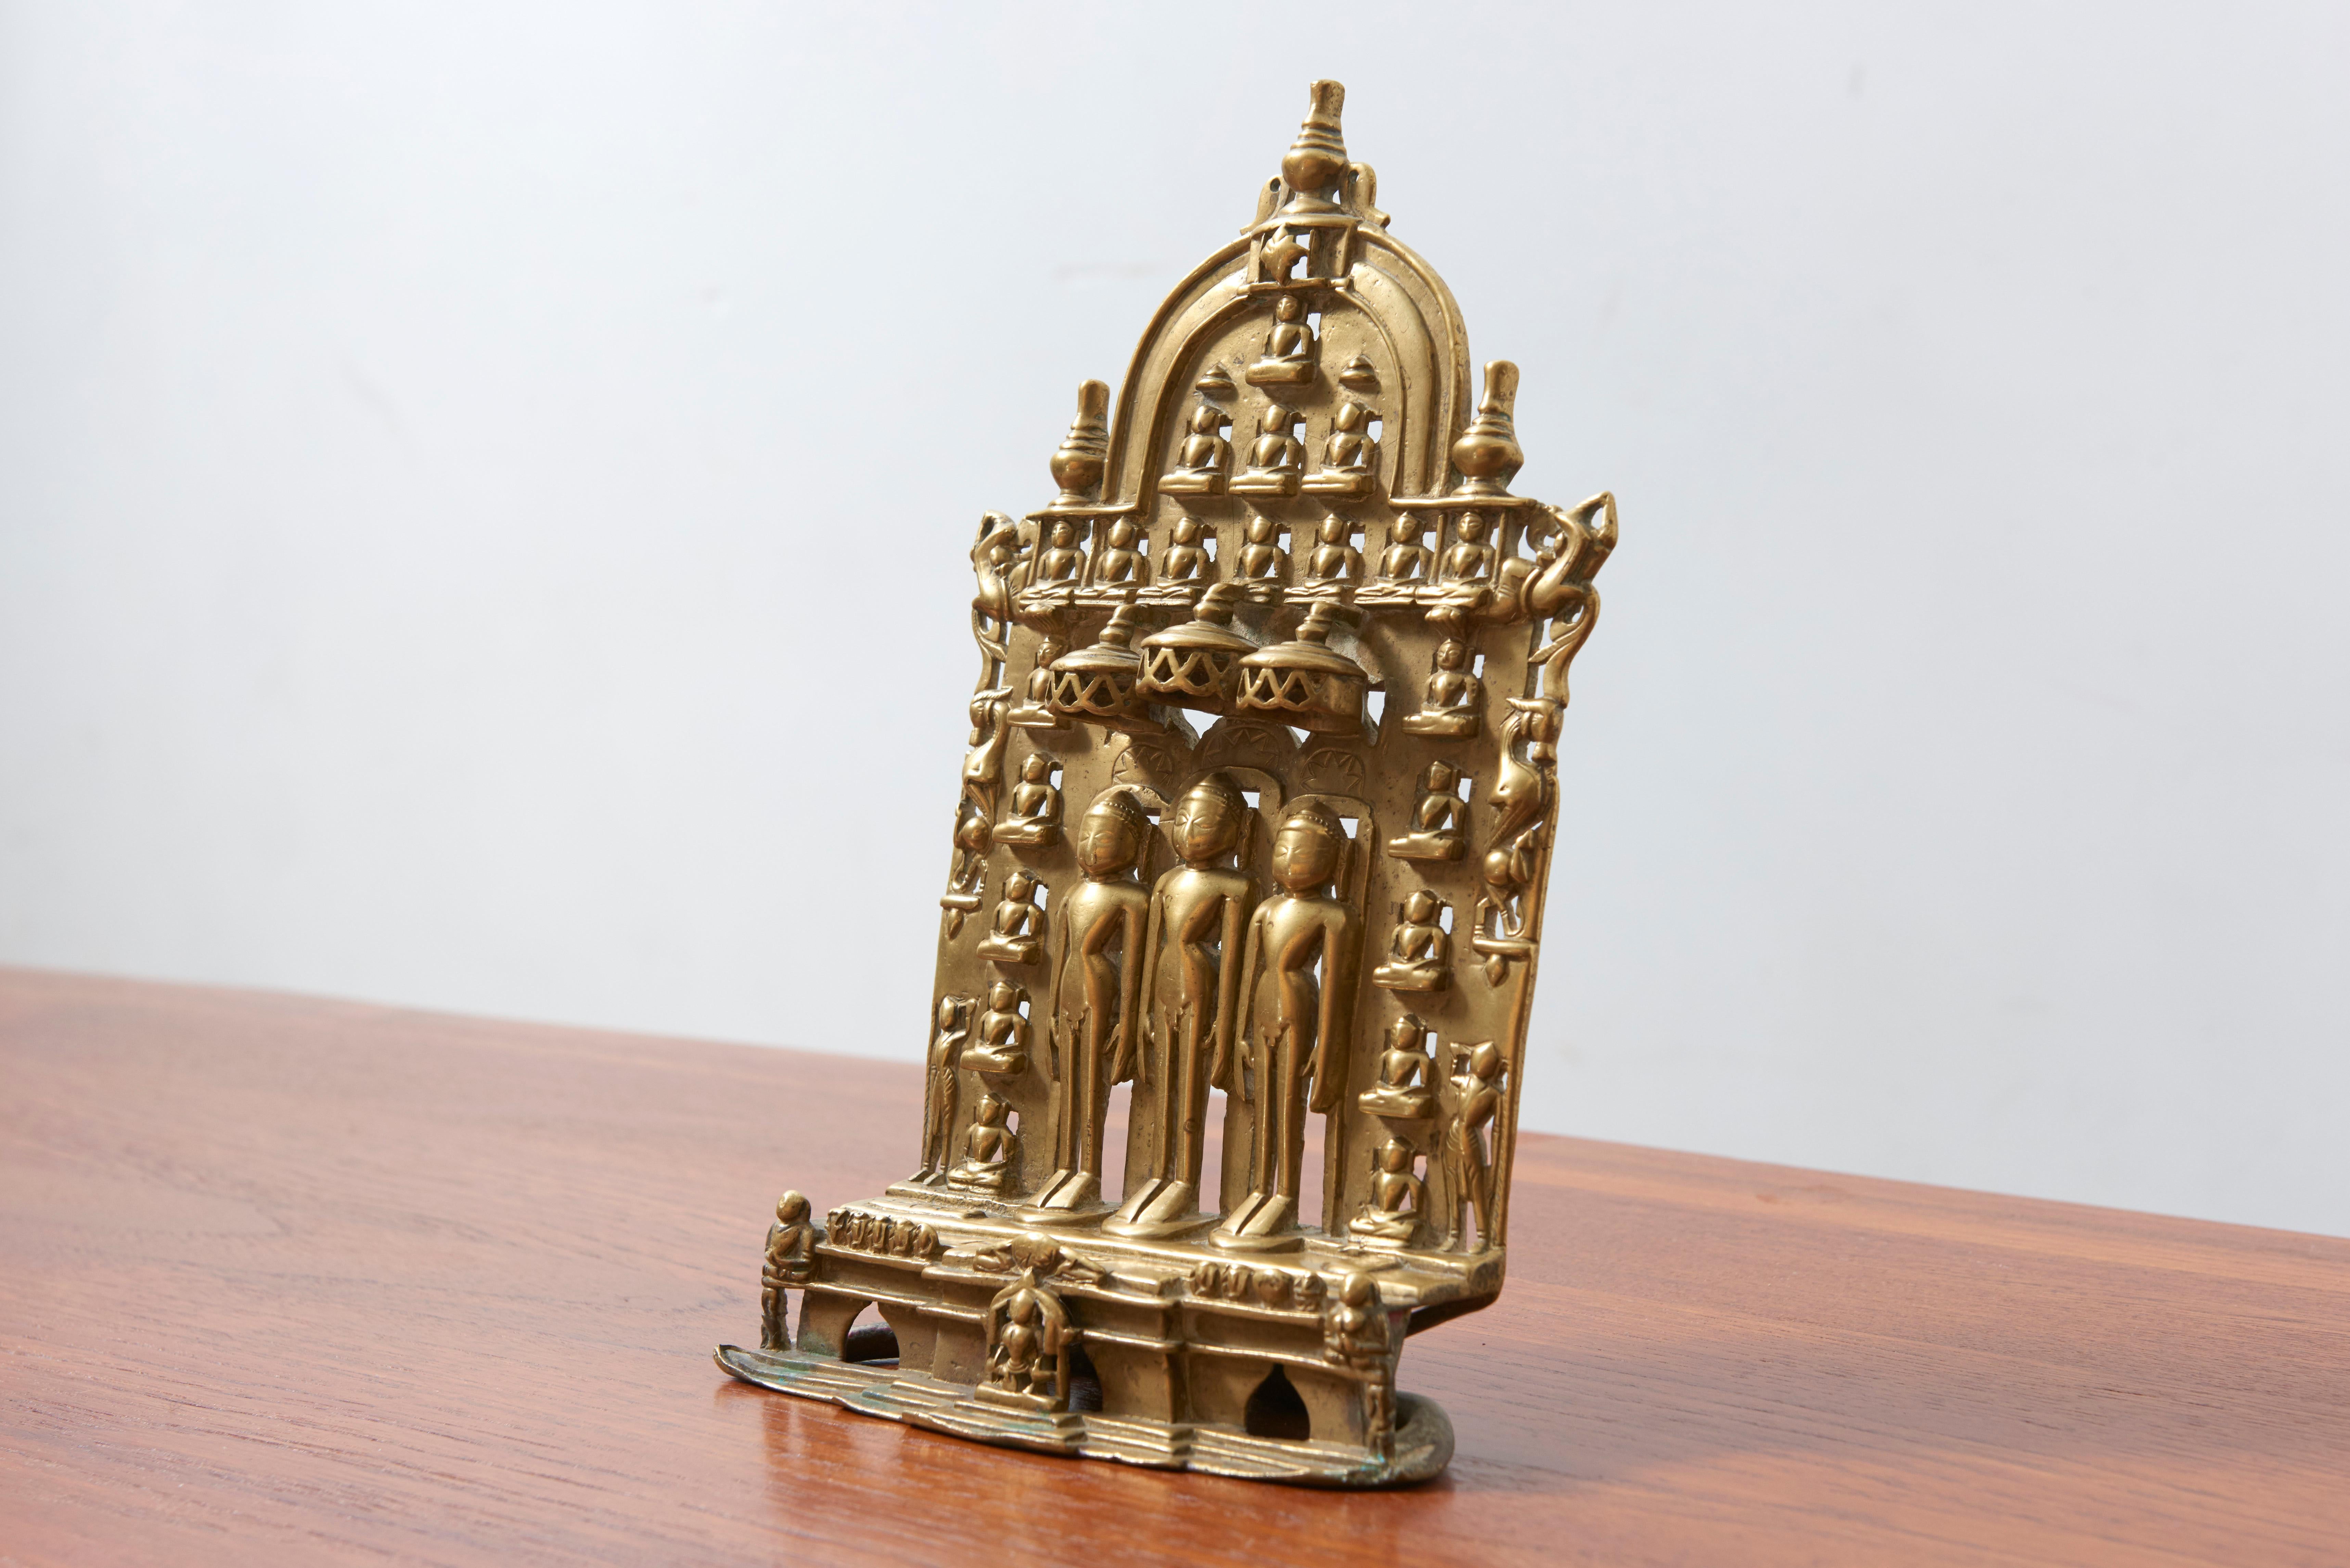 An authentic, ancient and exceptional Three Jina Shrine. For it’s age the altarpiece is in a very good condition and rather large. The image of three standing, nude Jinas flanked by the other 21 seated Jinas is rare. The lintel of the shrine is